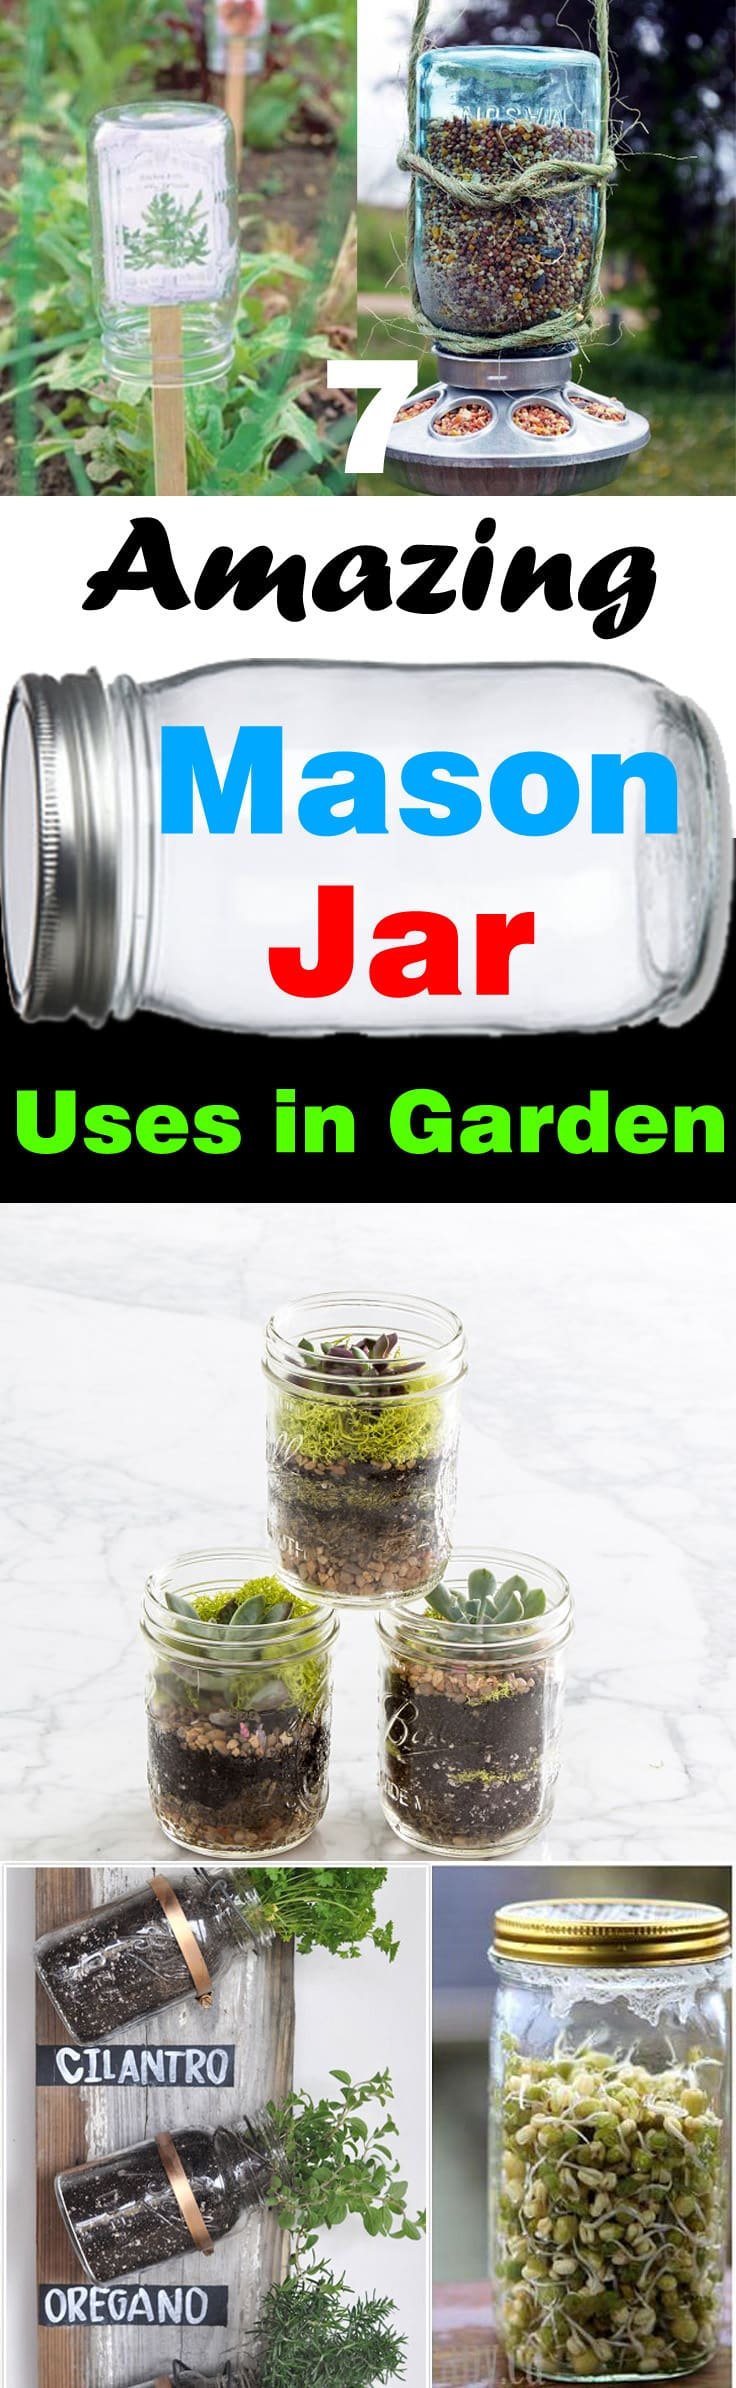 Have a collection of unused mason jars? Don't throw them! Here're 7 DIY Mason jar uses in garden you can look at for inspiration.